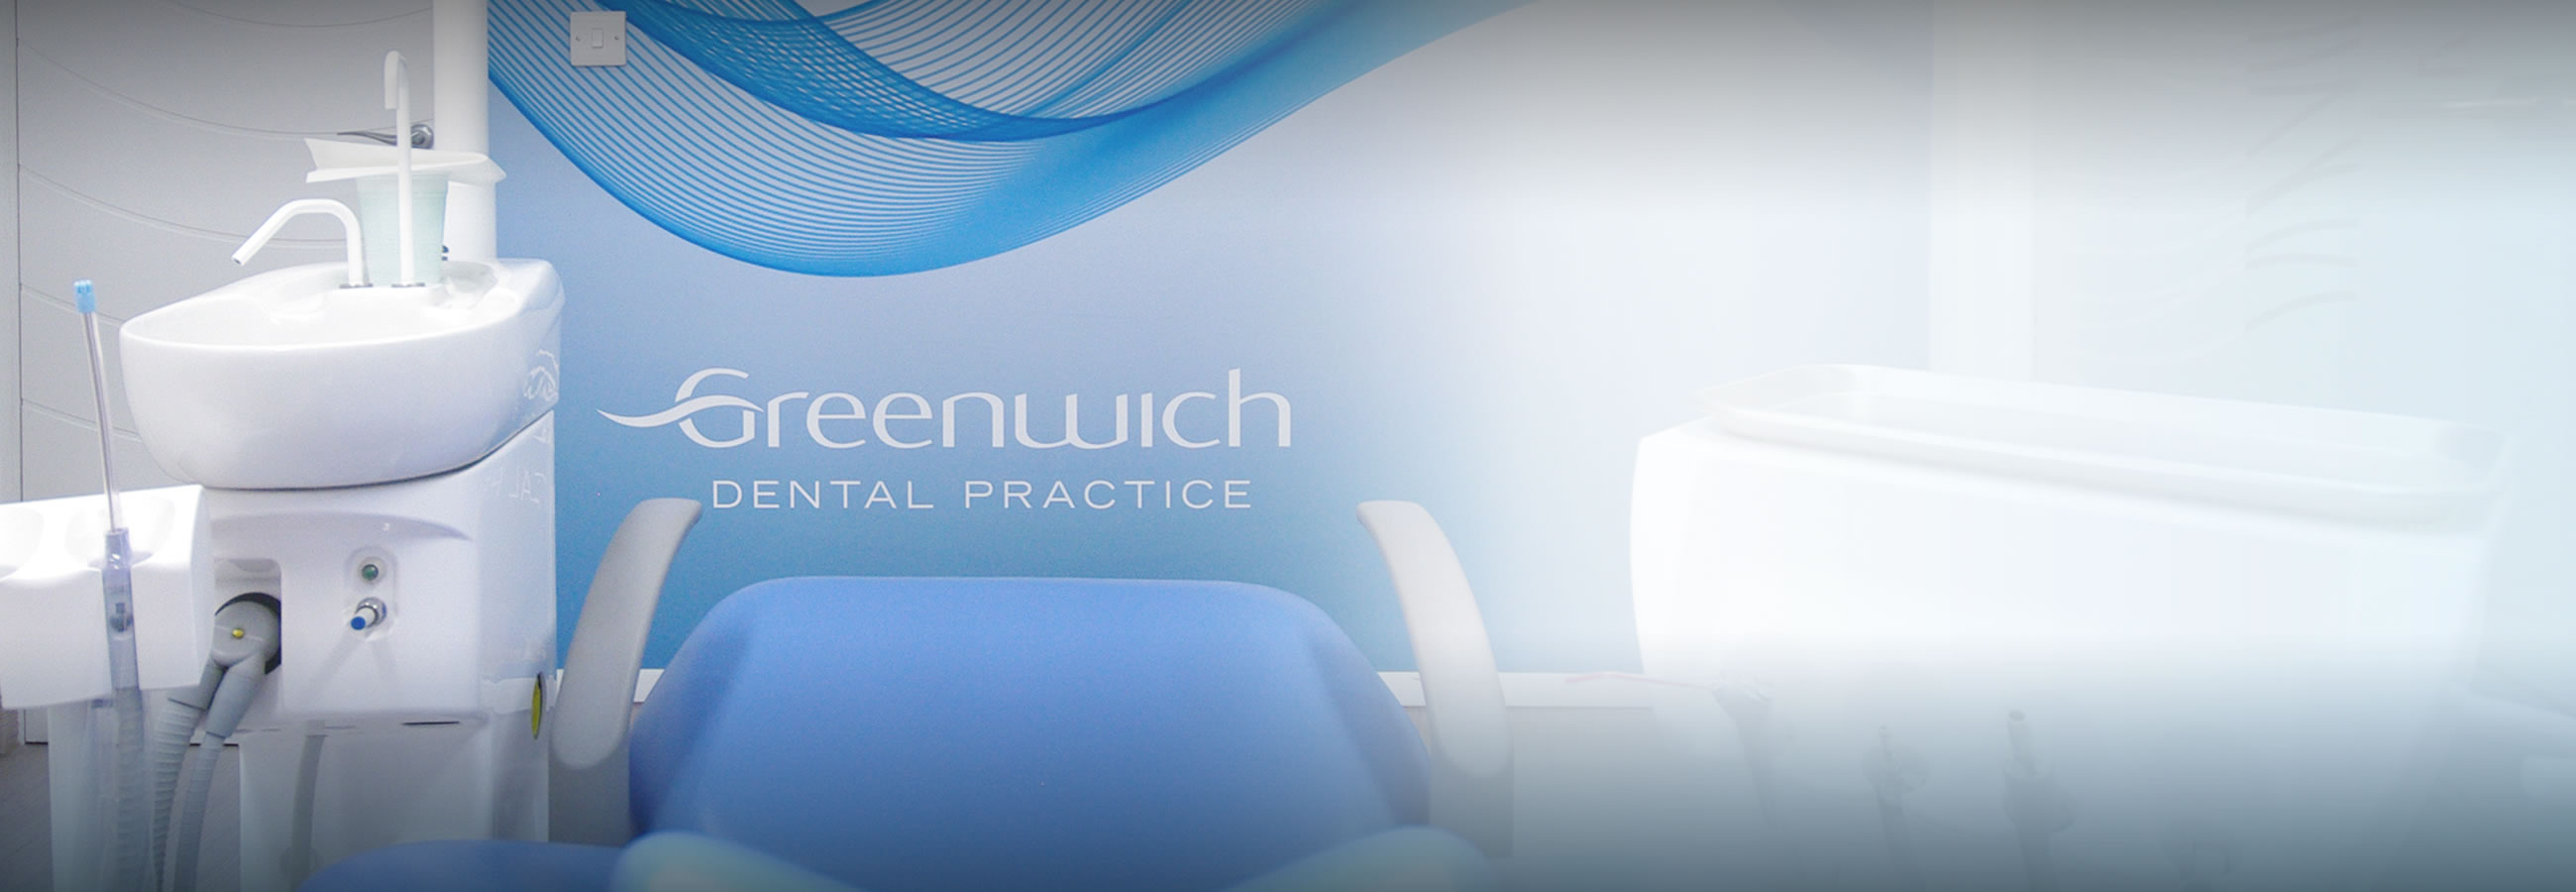 Patient reviews for Greenwich Dental Practice